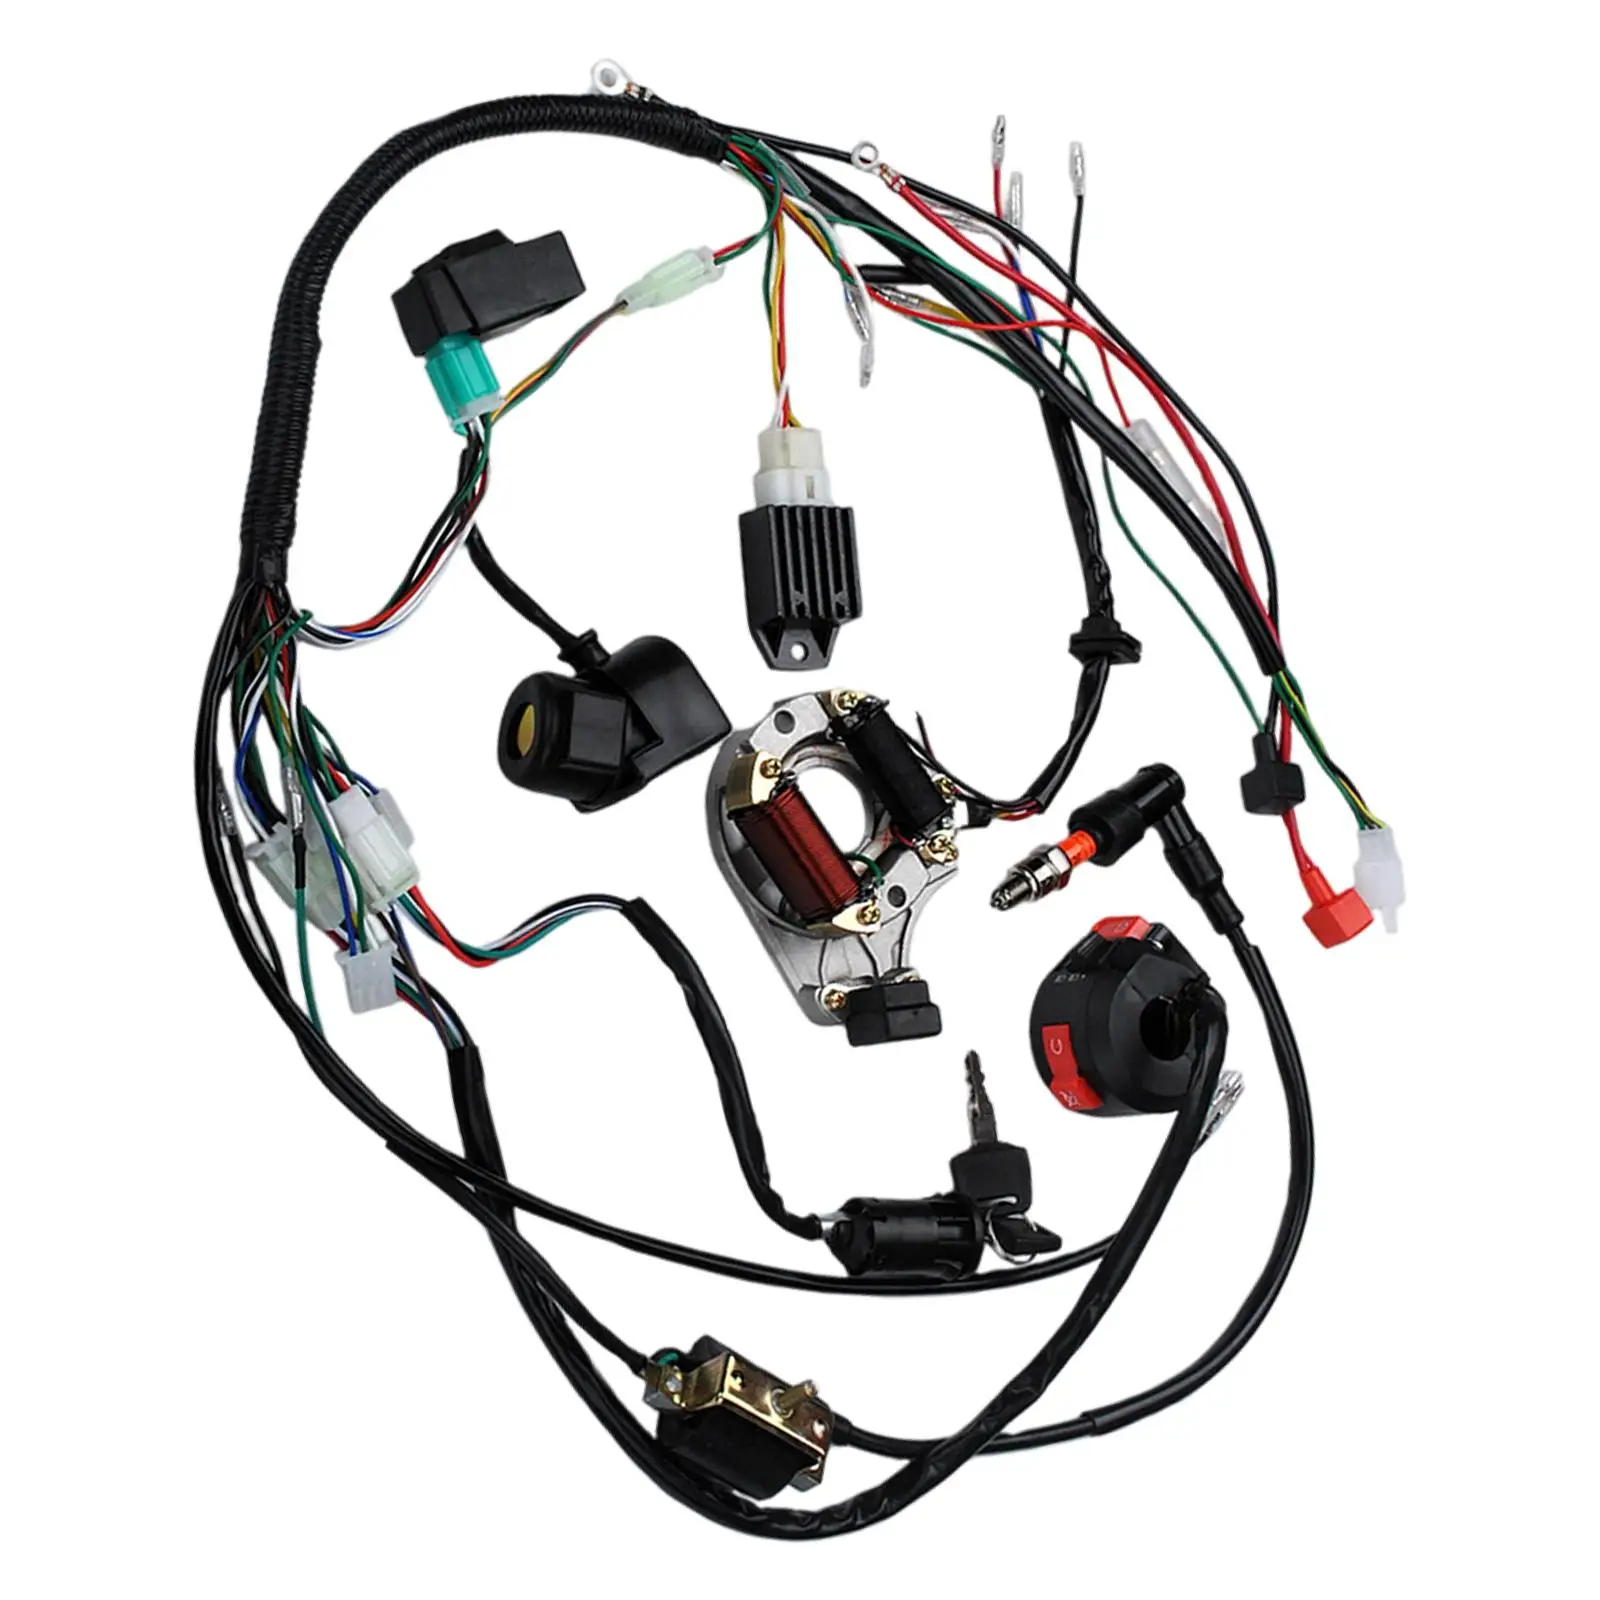 Complete Electrics Wire Harness Kit Solenoid Relay Coil Stator for Motorcycle Scooter Buggy 4 Wheelers Stroke 50cc -125cc